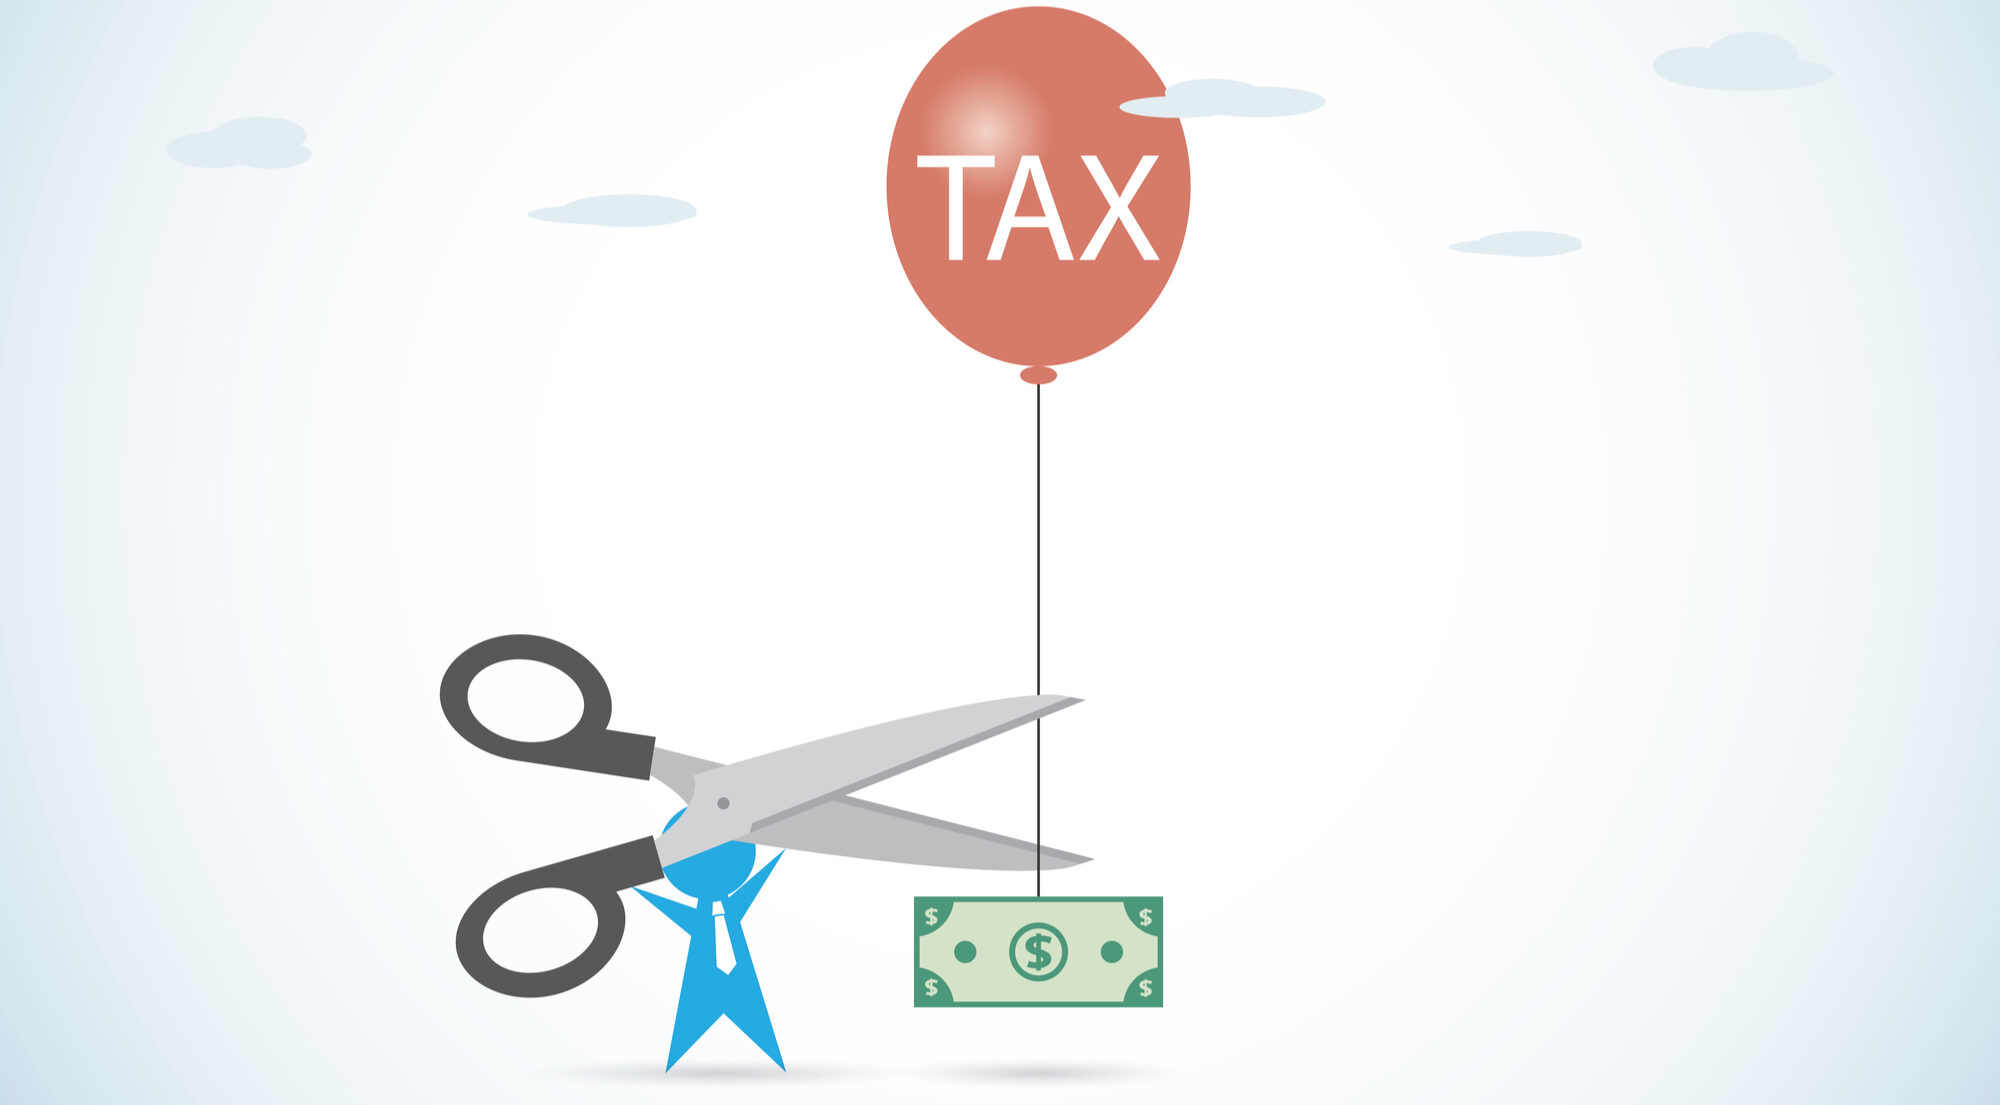 MA TaxFree Holiday 2020 How To Maximize Savings And Earn Money